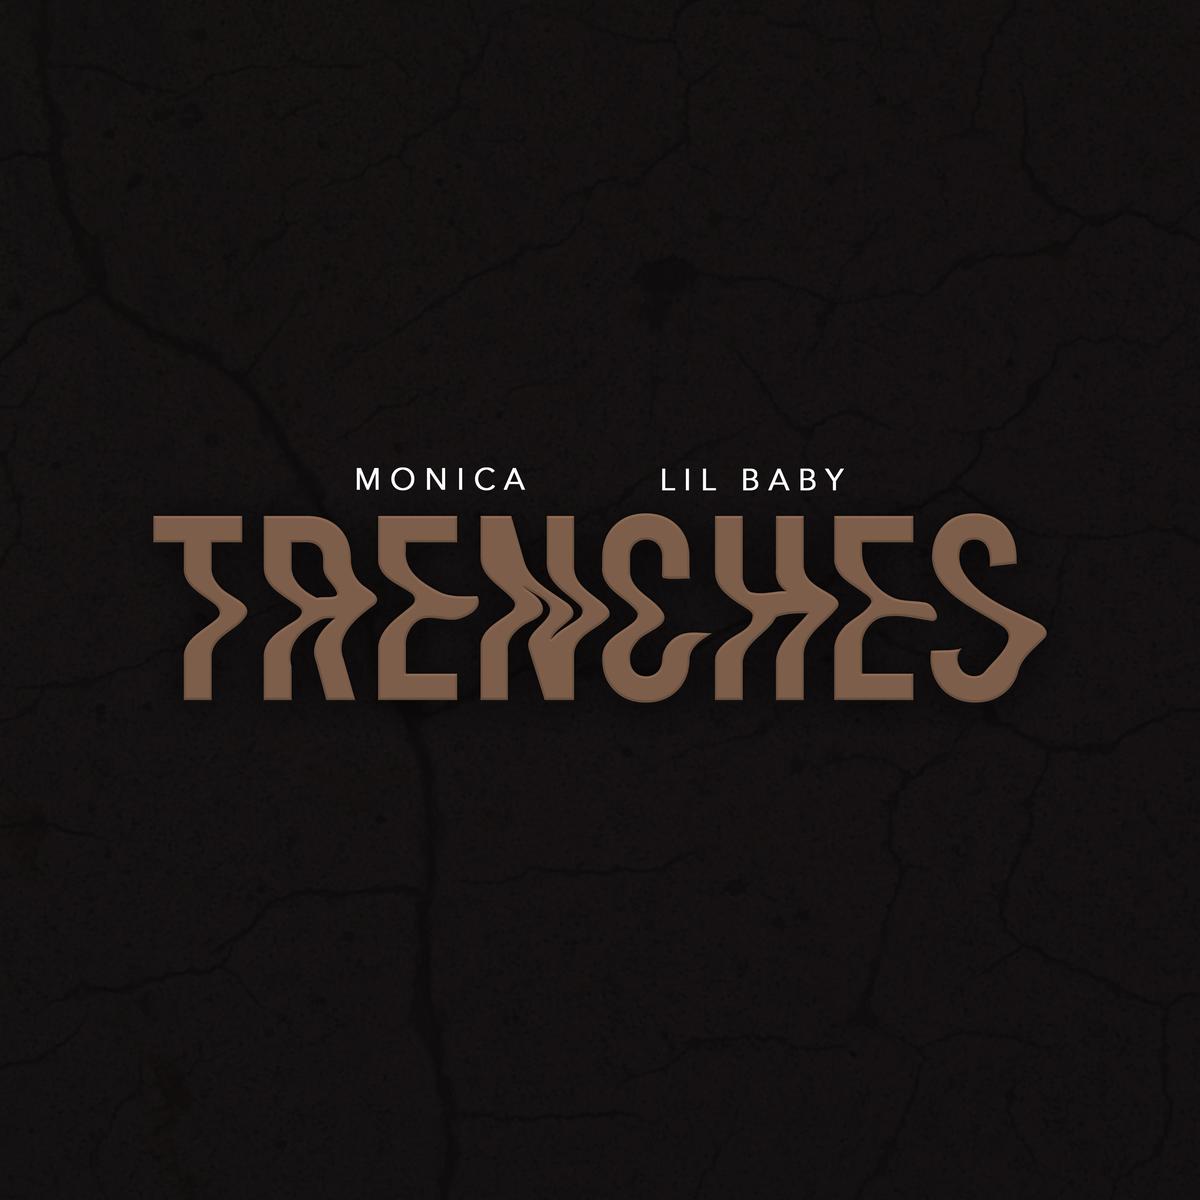 New Music: Monica & Lil Baby - Trenches (Produced by The Neptunes)